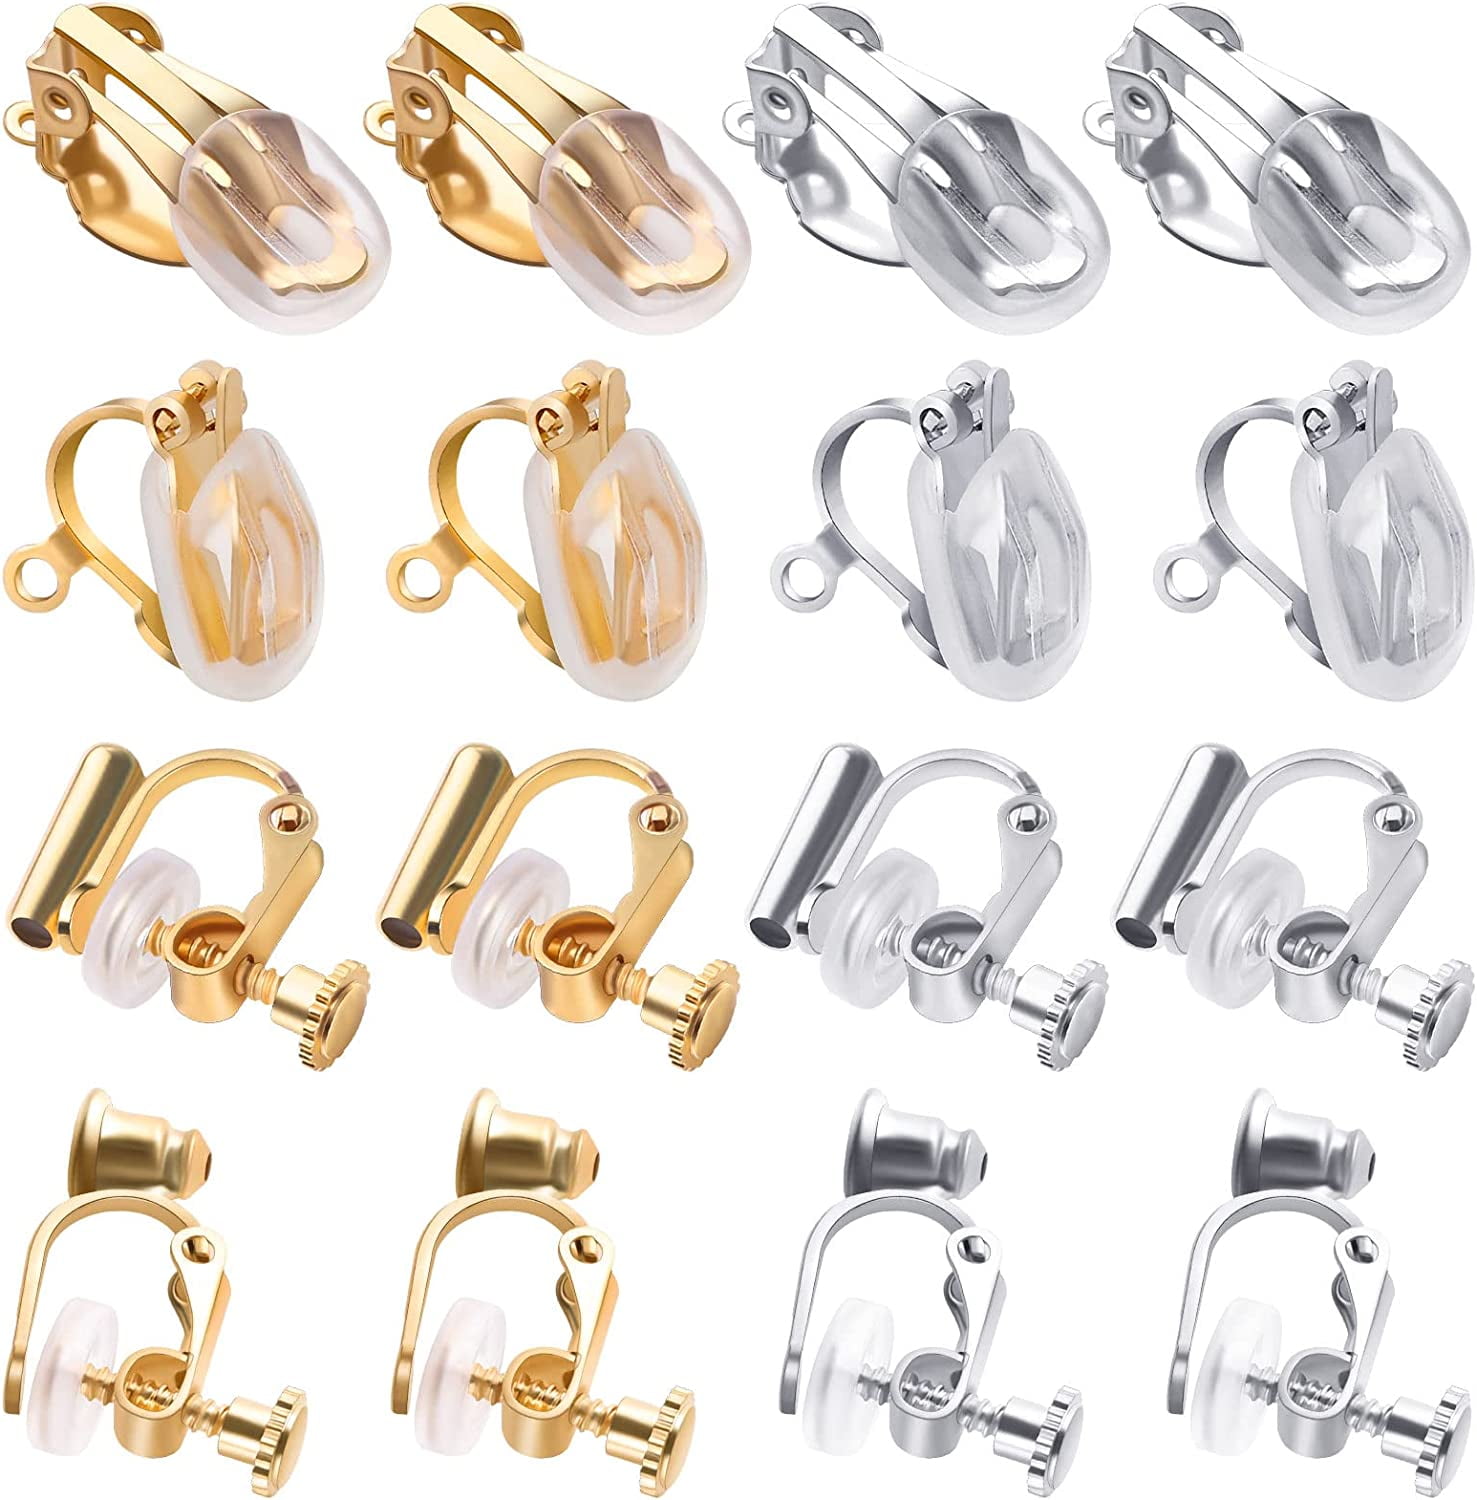 Clip on Earring Converter, 16 Pcs Round Flat Back Tray Earring Clips ...